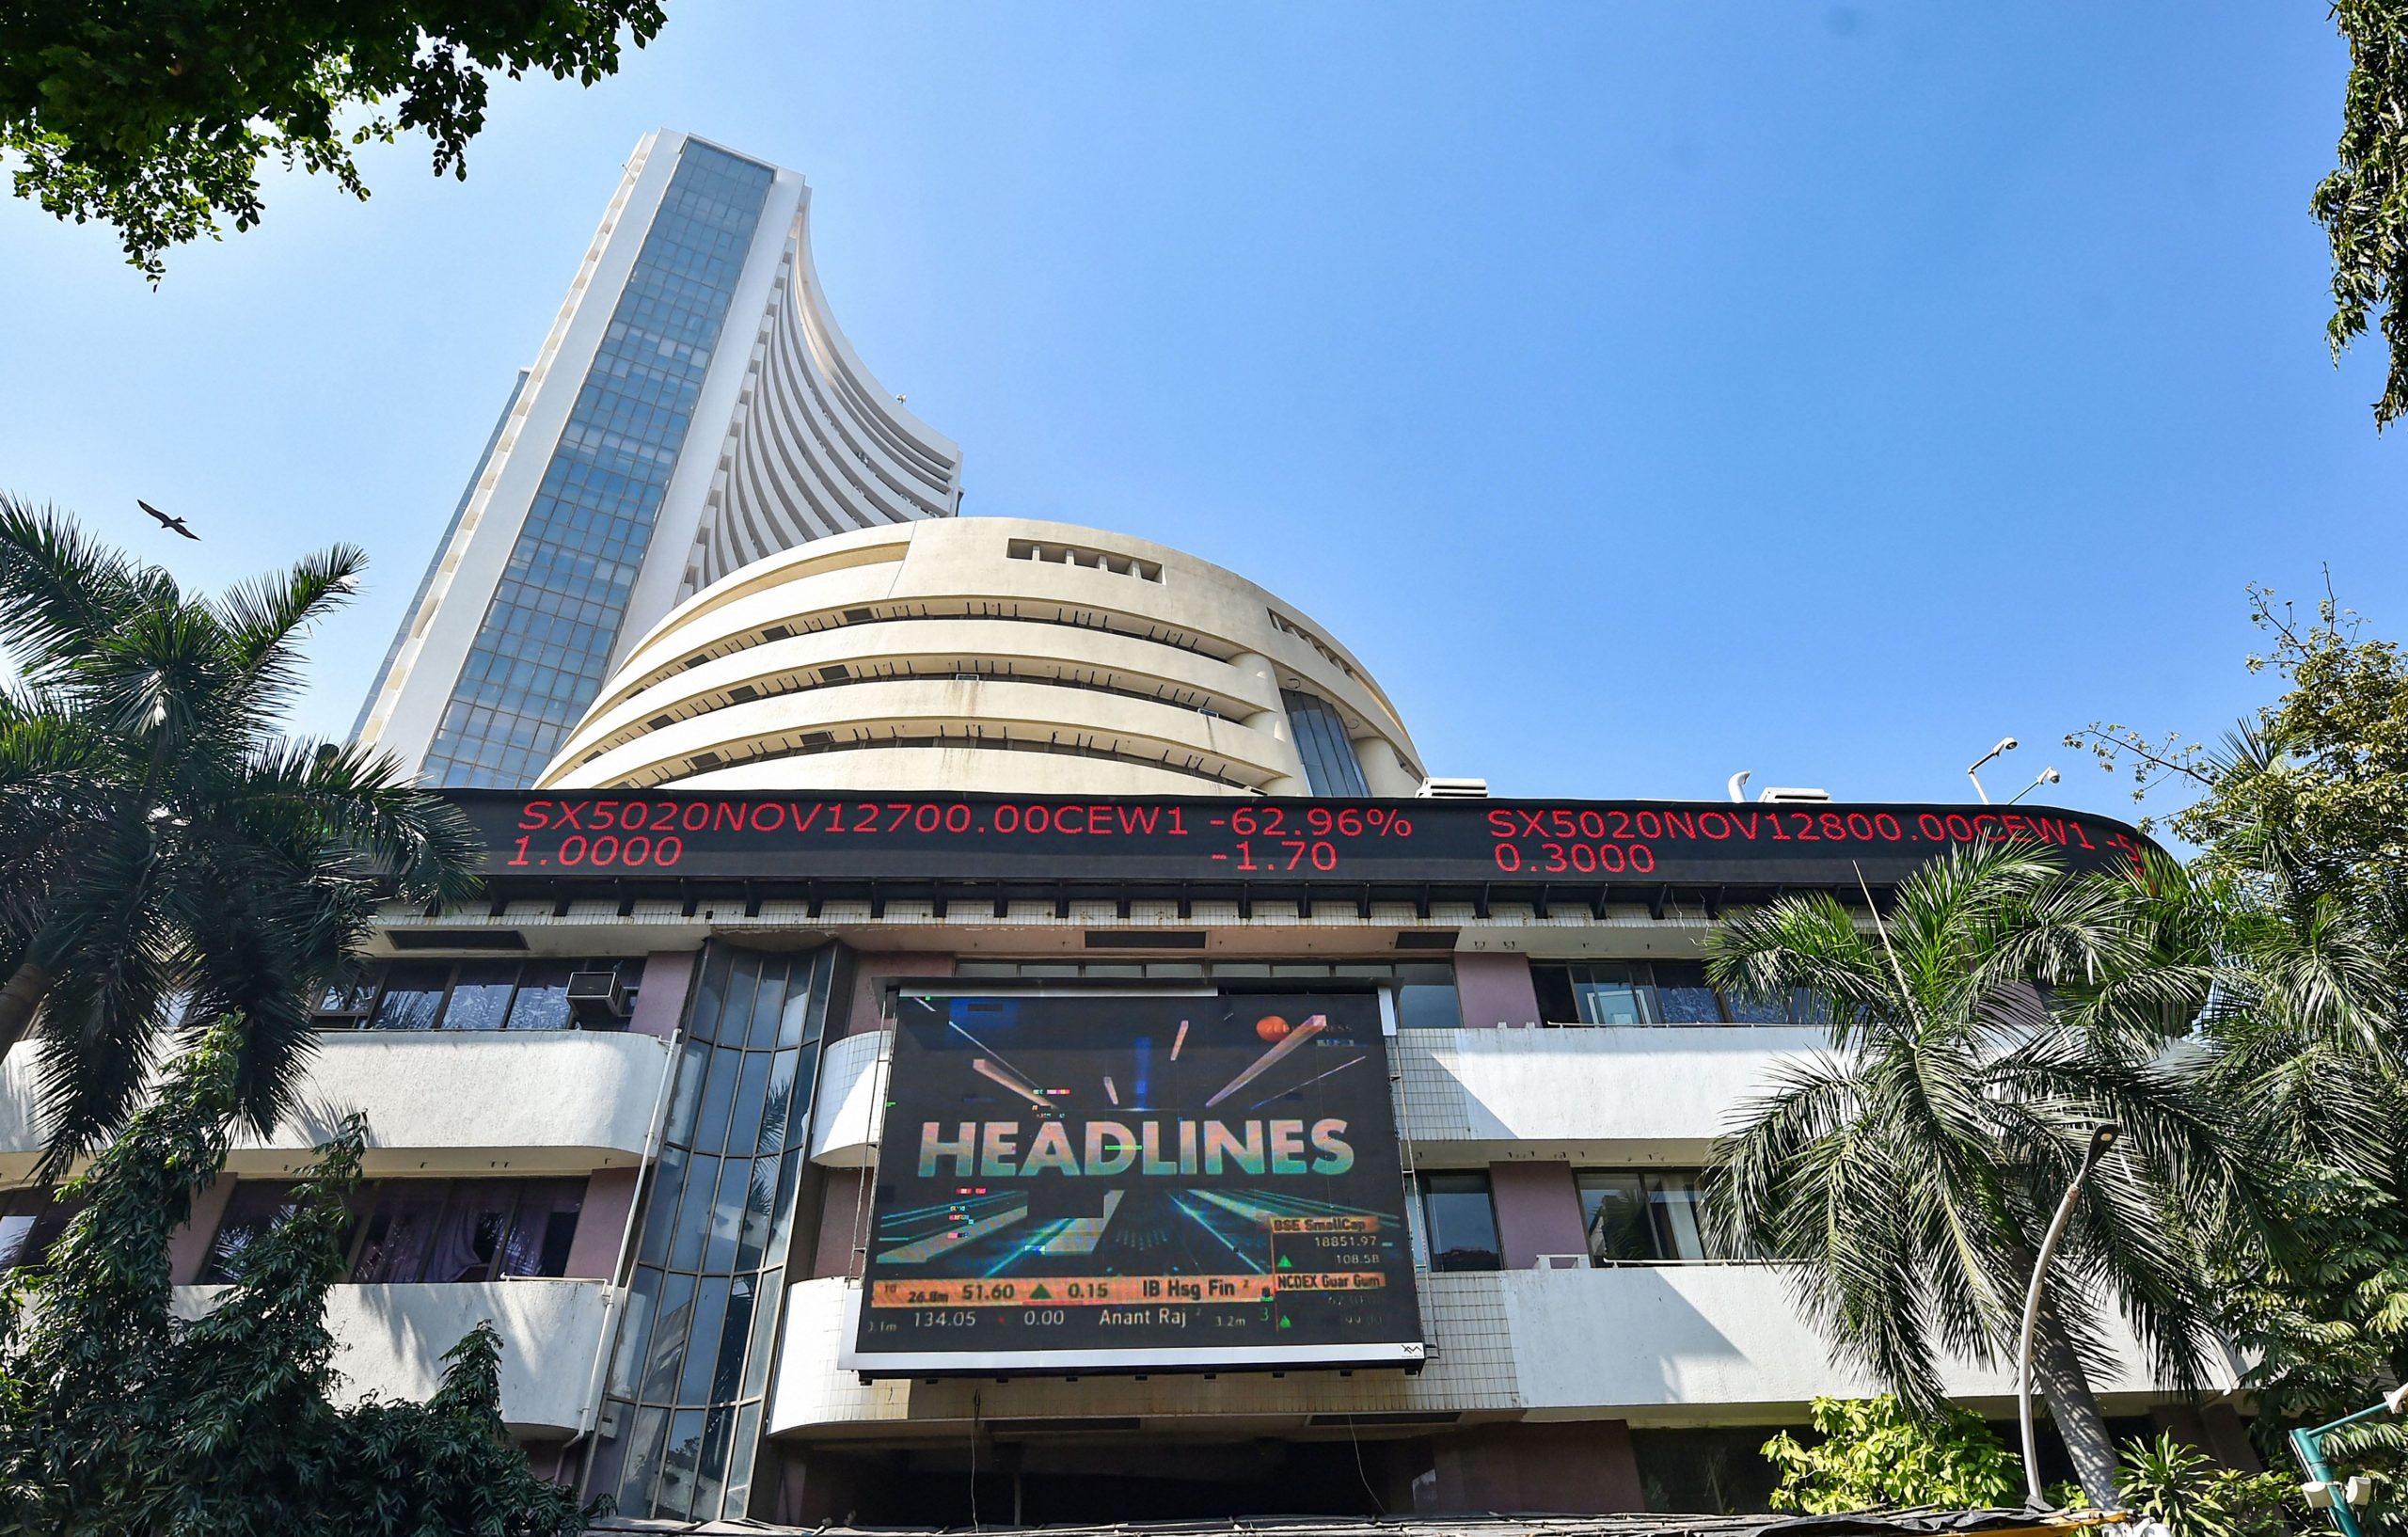 Trending Stocks: Tech Mahindra, Eicher, Sun Pharma and others in news today